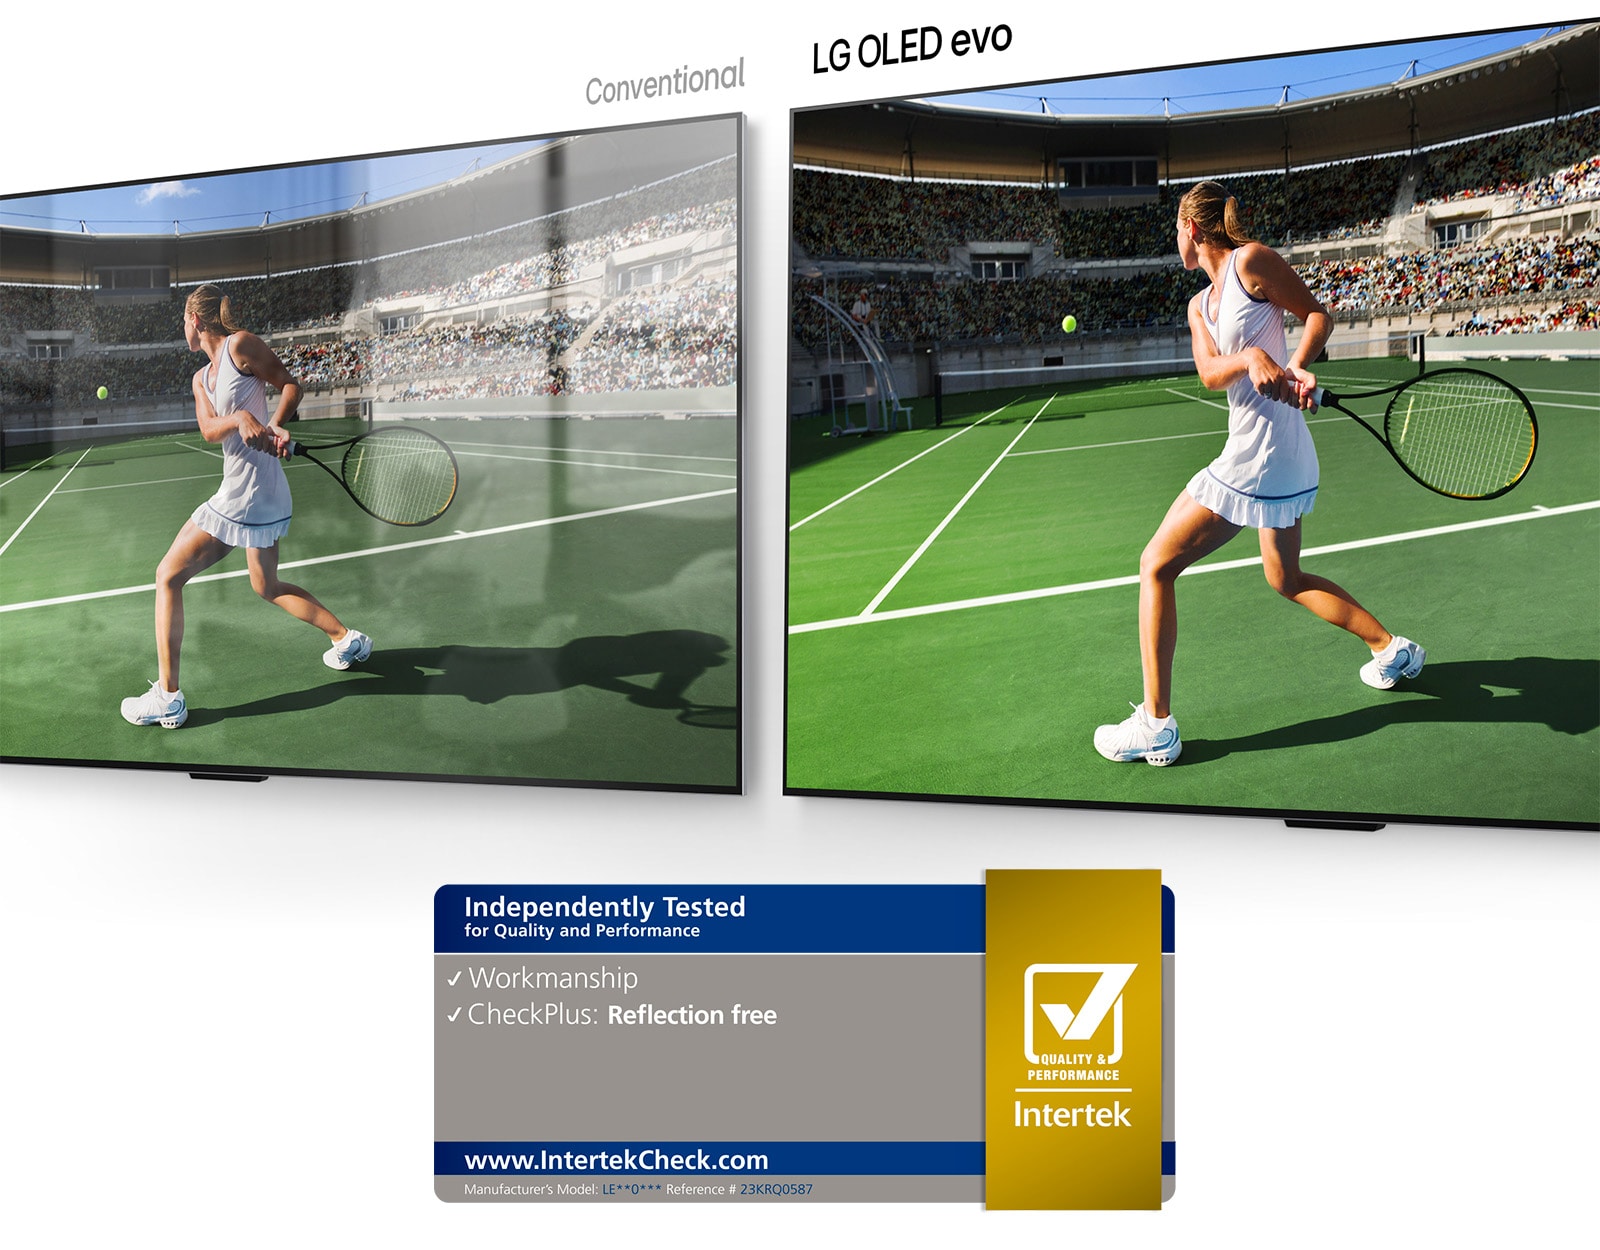 On the left, a conventional TV showing a tennis player in a stadium with room reflection on the screen. On the right, LG OLED evo M4 showing the same image of a tennis player in a stadium with no room reflection, and the image looks brighter and more colorful.